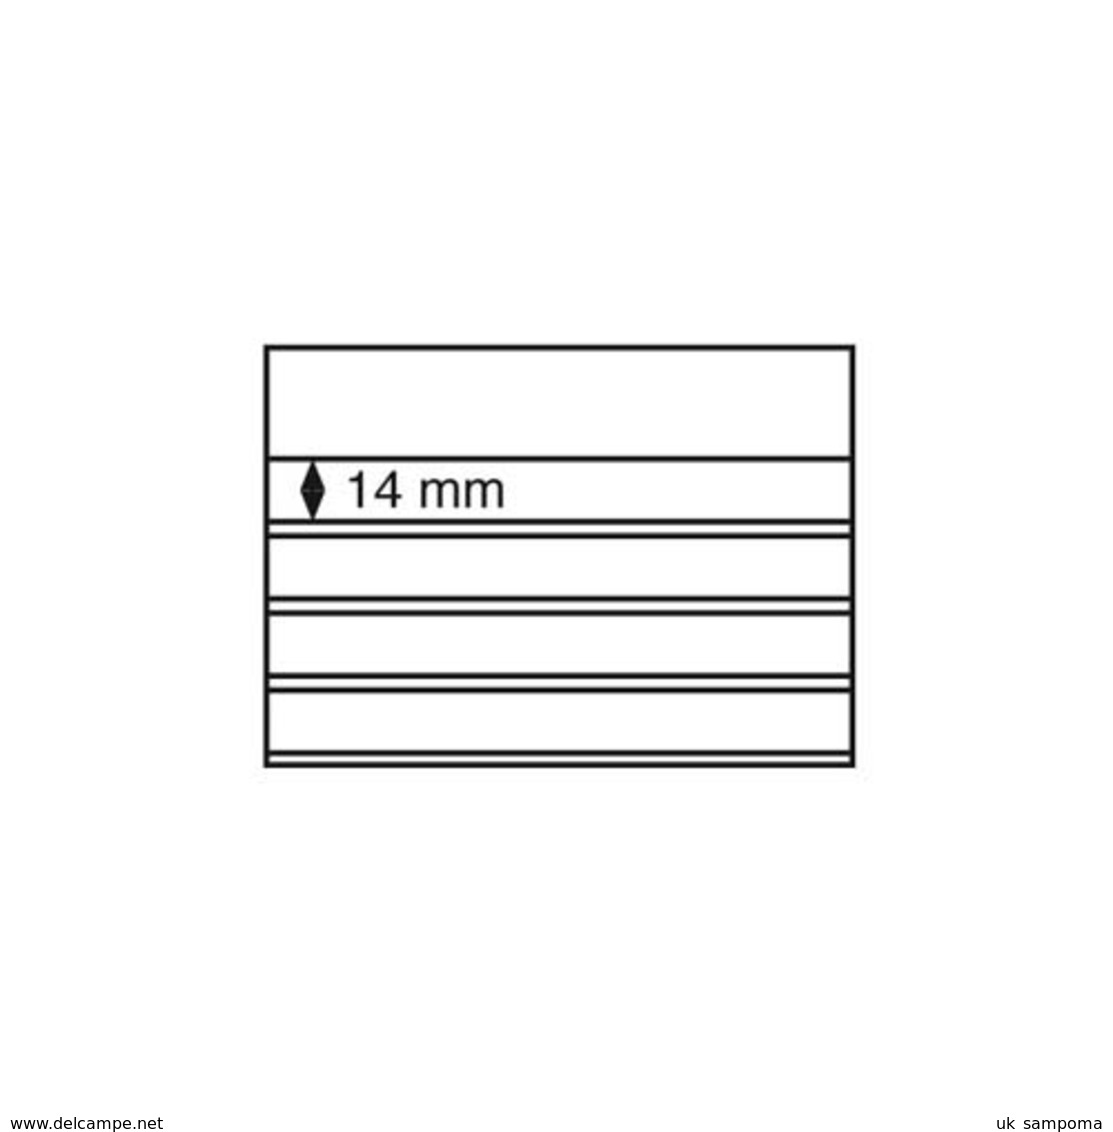 Standard Cards PVC 158x113 Mm,l4 Clear Strips With Cover Sheet, Black Card, 100 Per Pack - Stock Sheets